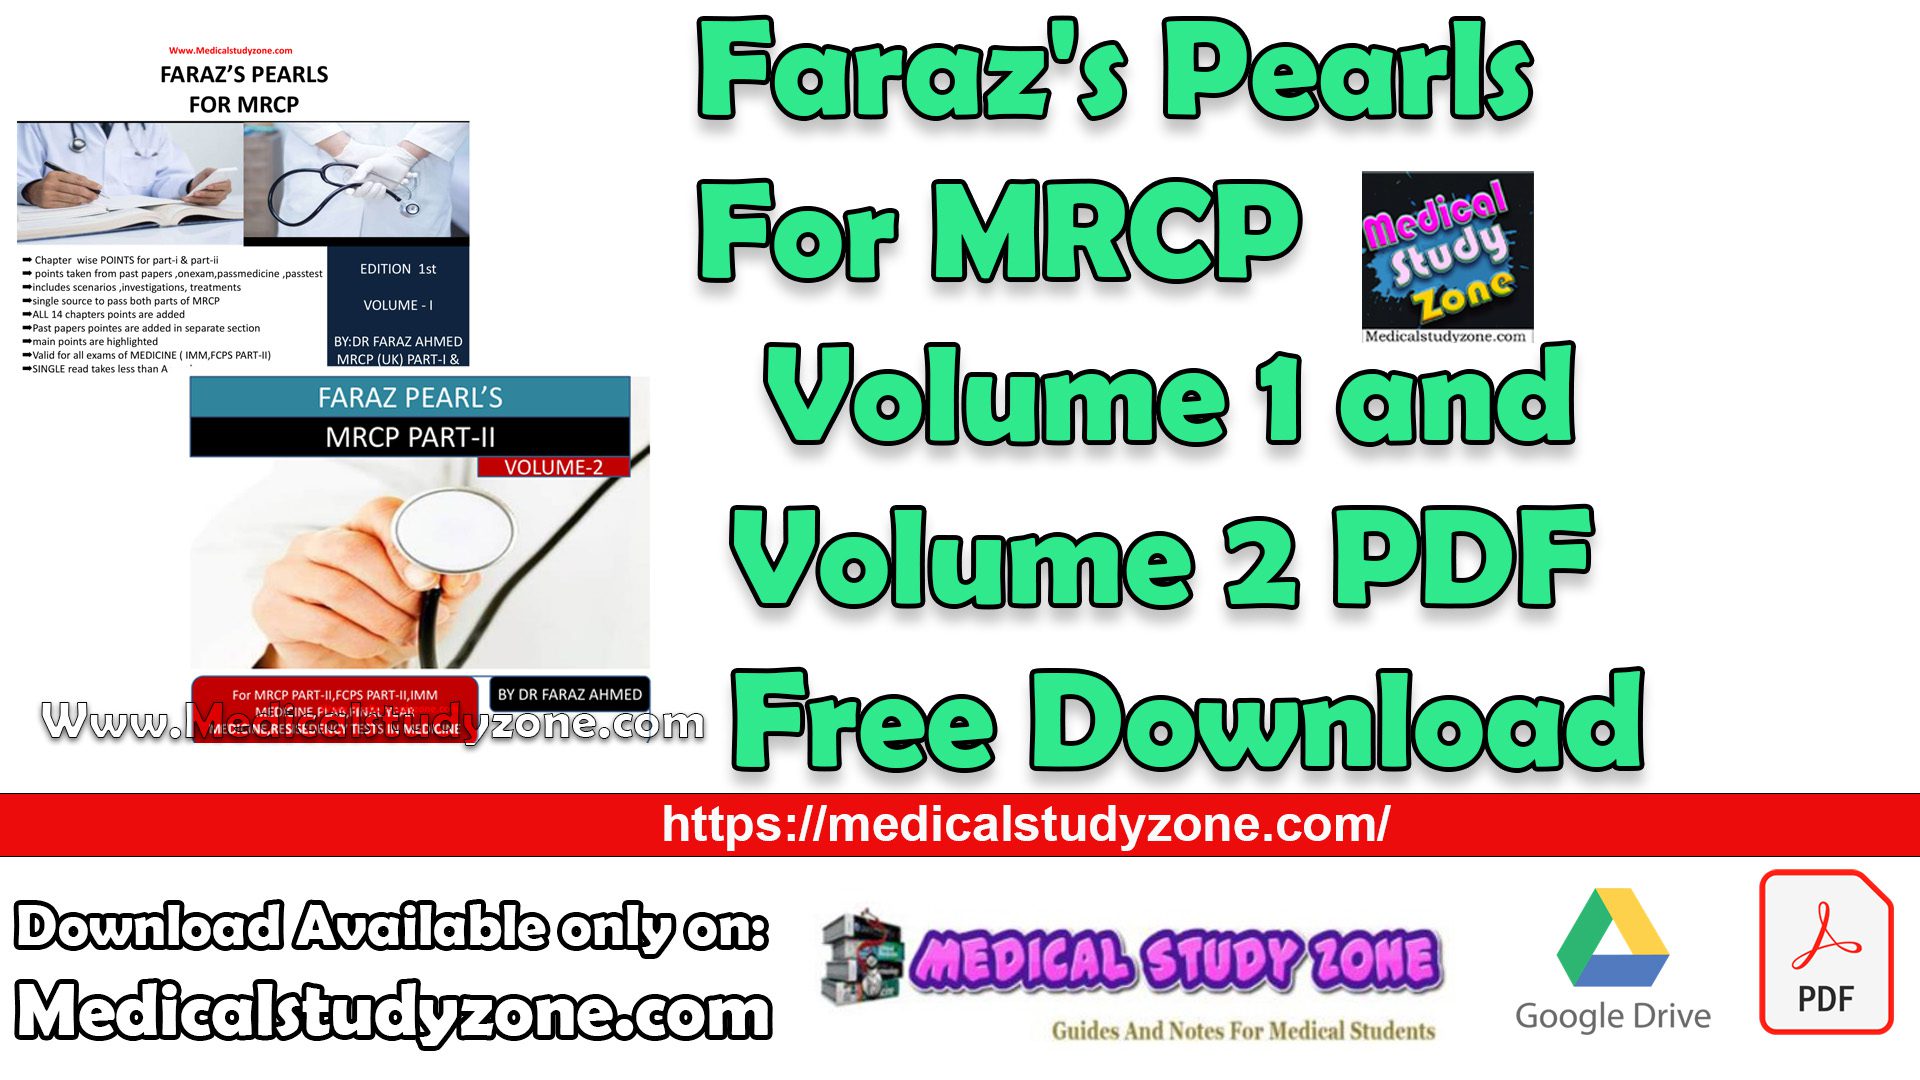 Faraz's Pearls For MRCP Volume 1 and 2 PDF Free Download